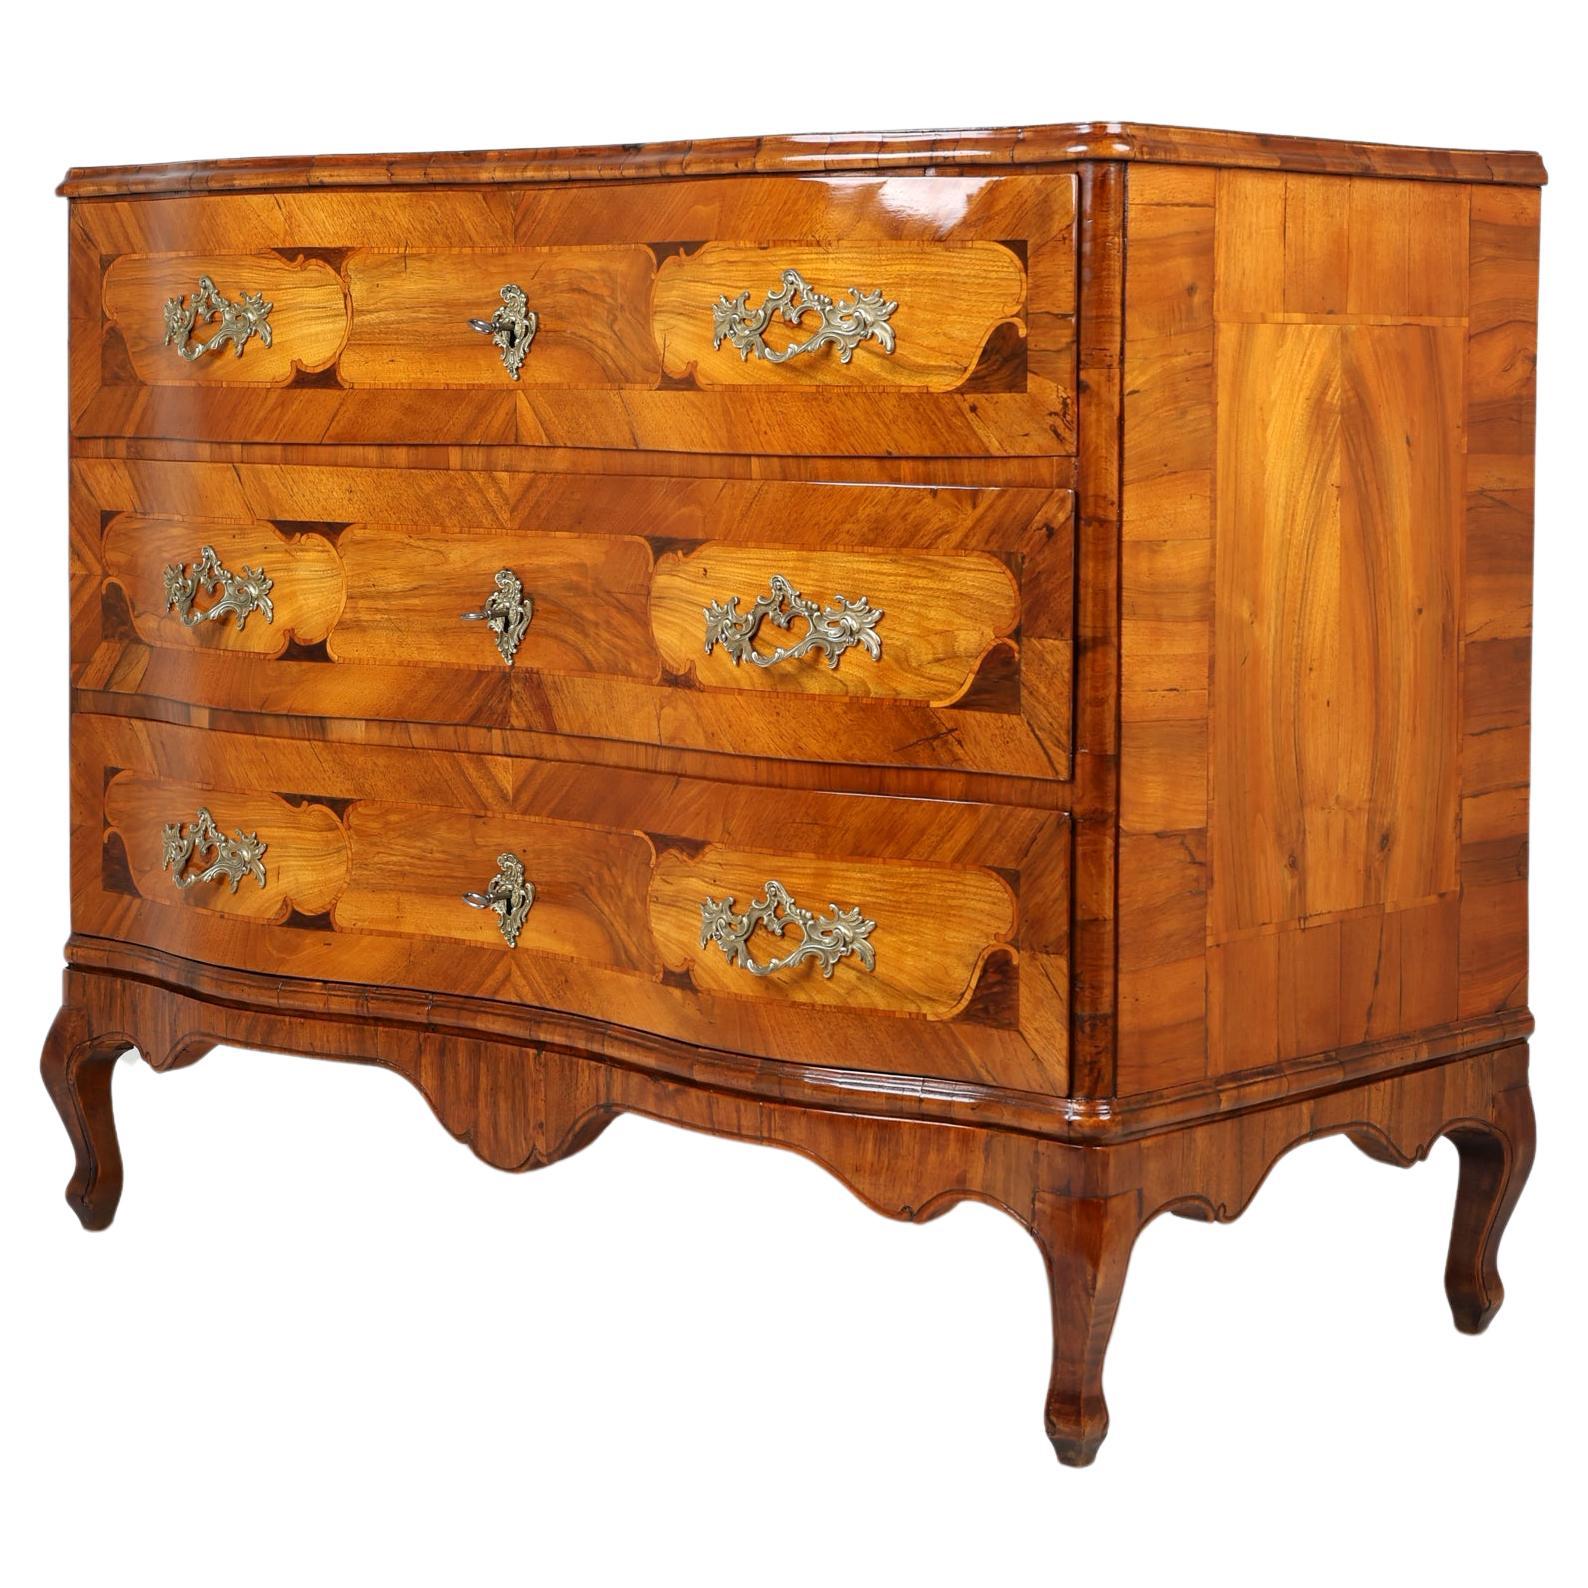 Late 18th Century Baroque Commode with Burl Walnut For Sale